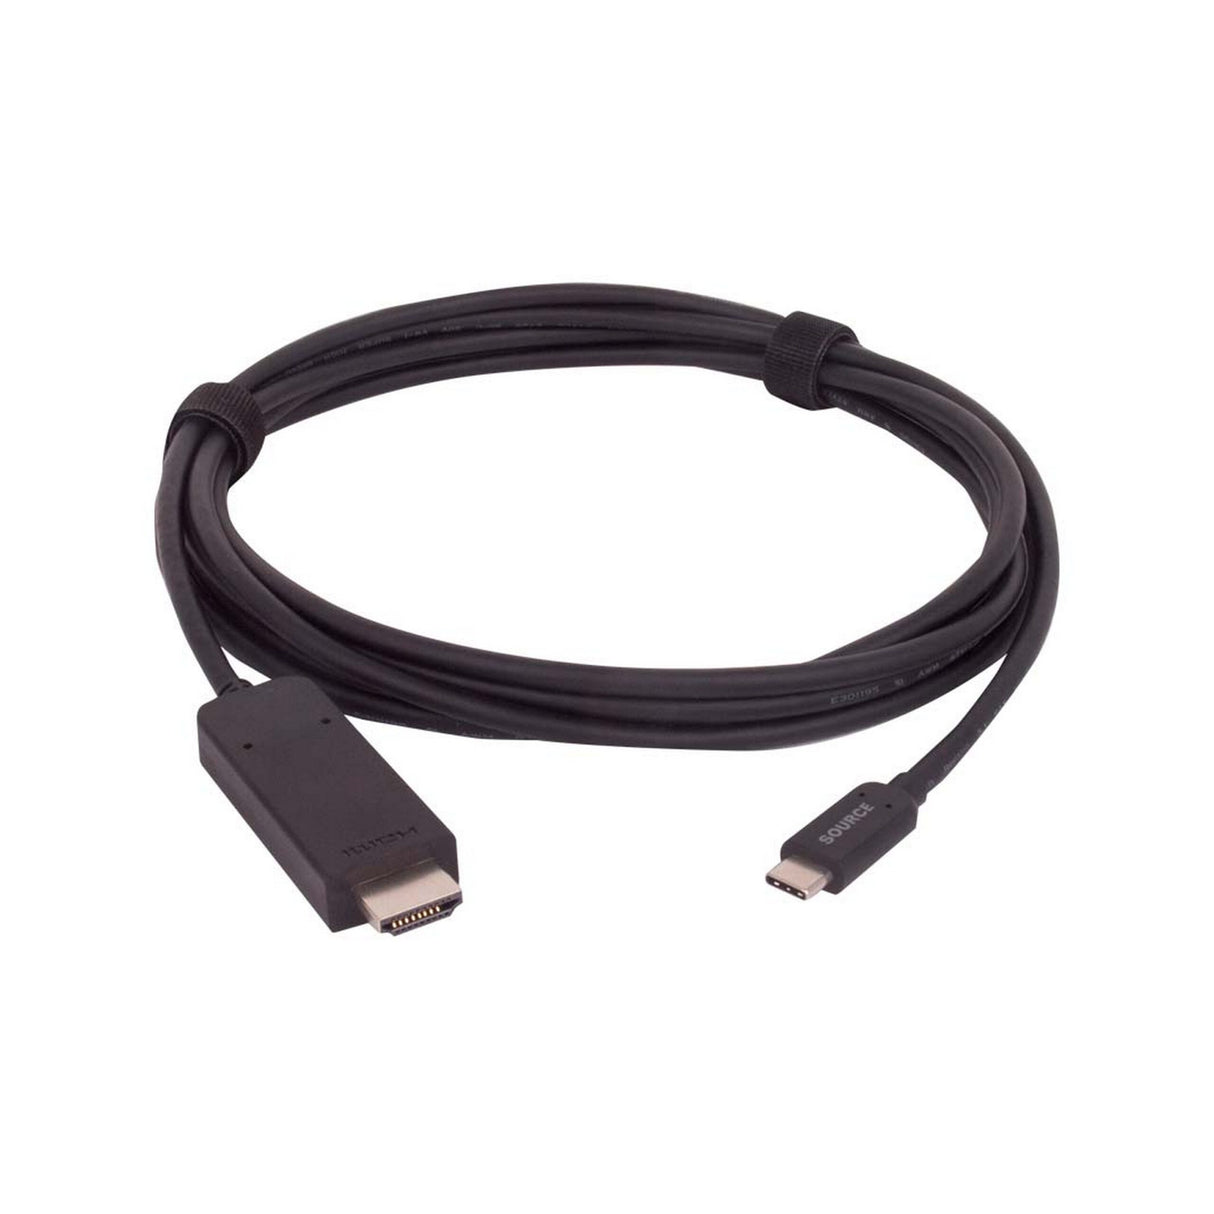 Liberty E-UCM-HDM-15F USB C Male to HDMI A Male Cable, 15 Foot